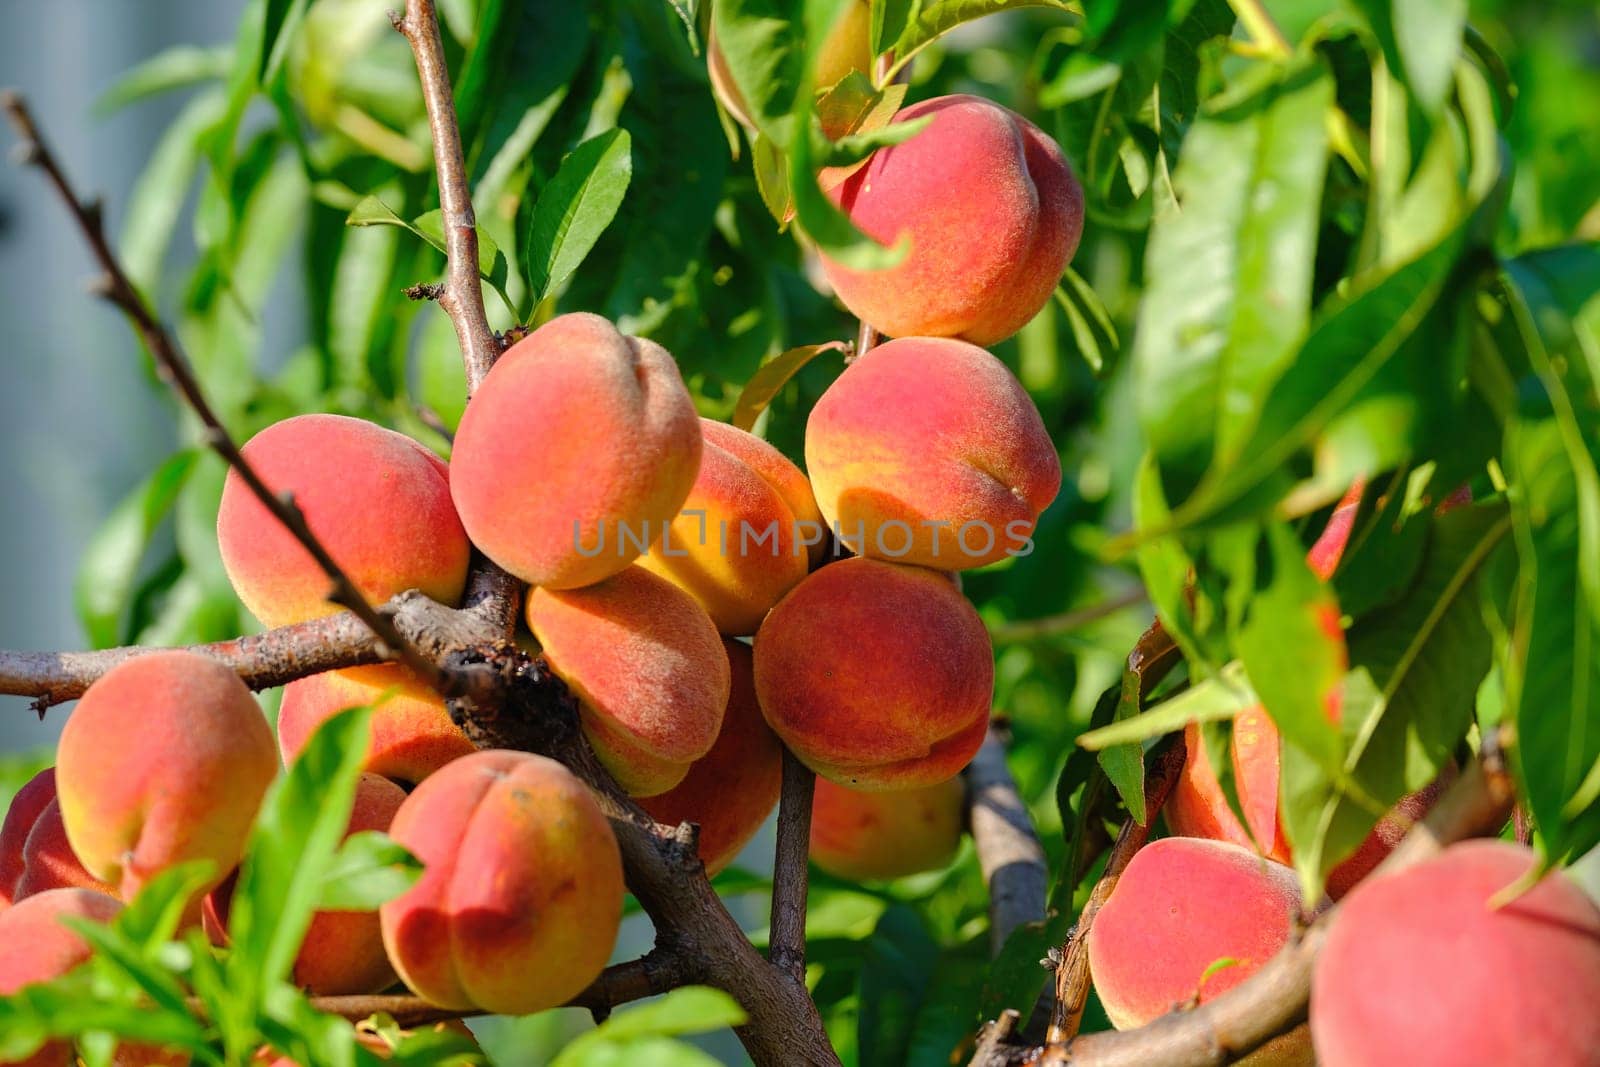 Peaches growing on a tree. Fresh peach tree download by igor010